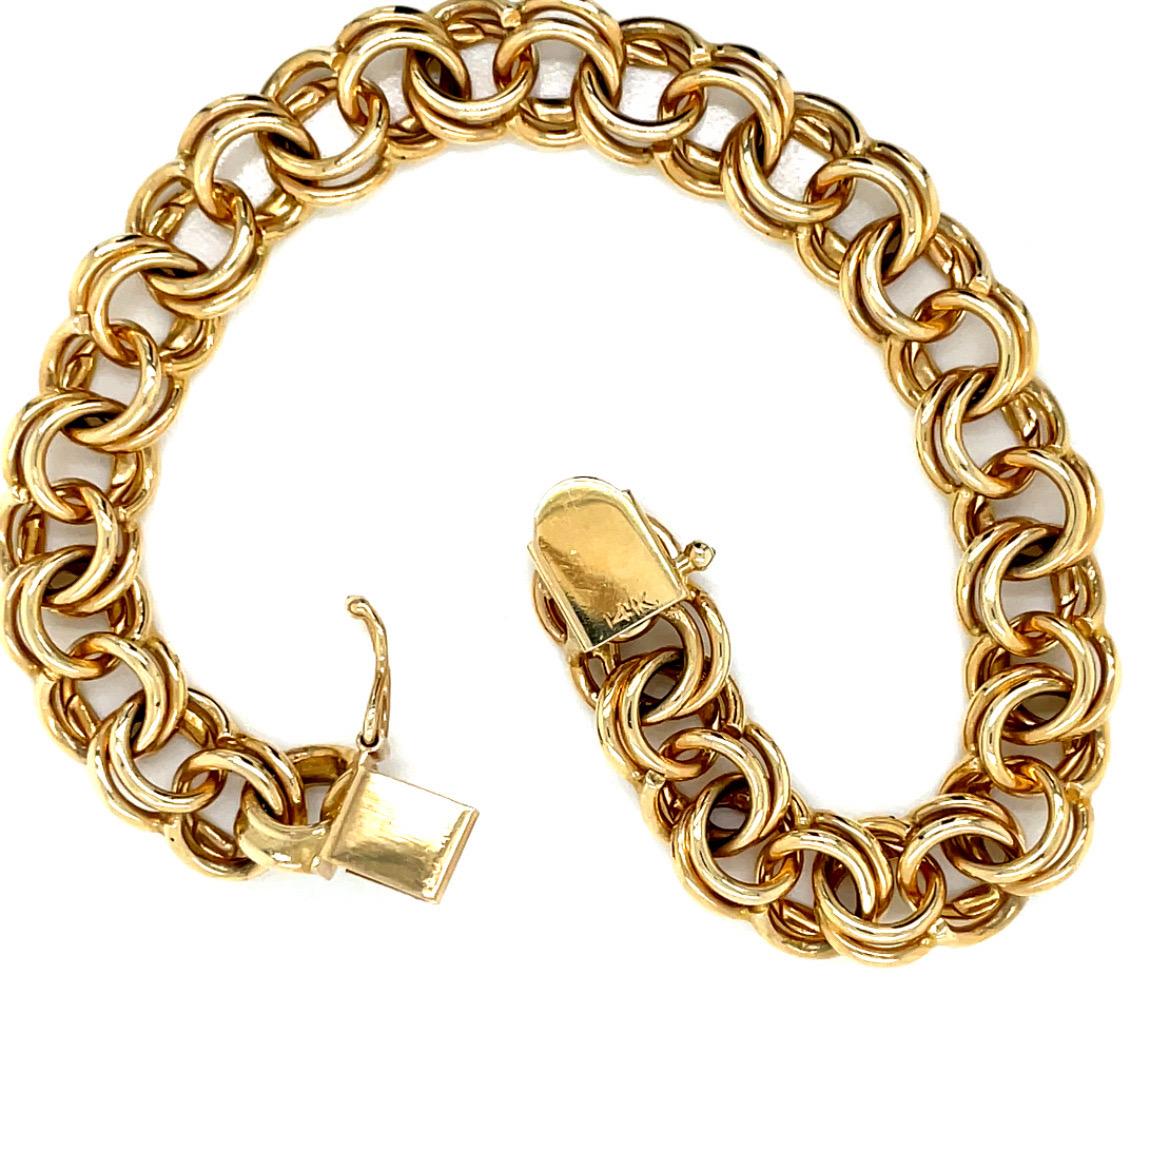 Vintage 14K Yellow Gold Charm Bracelet  In Excellent Condition For Sale In Boston, MA